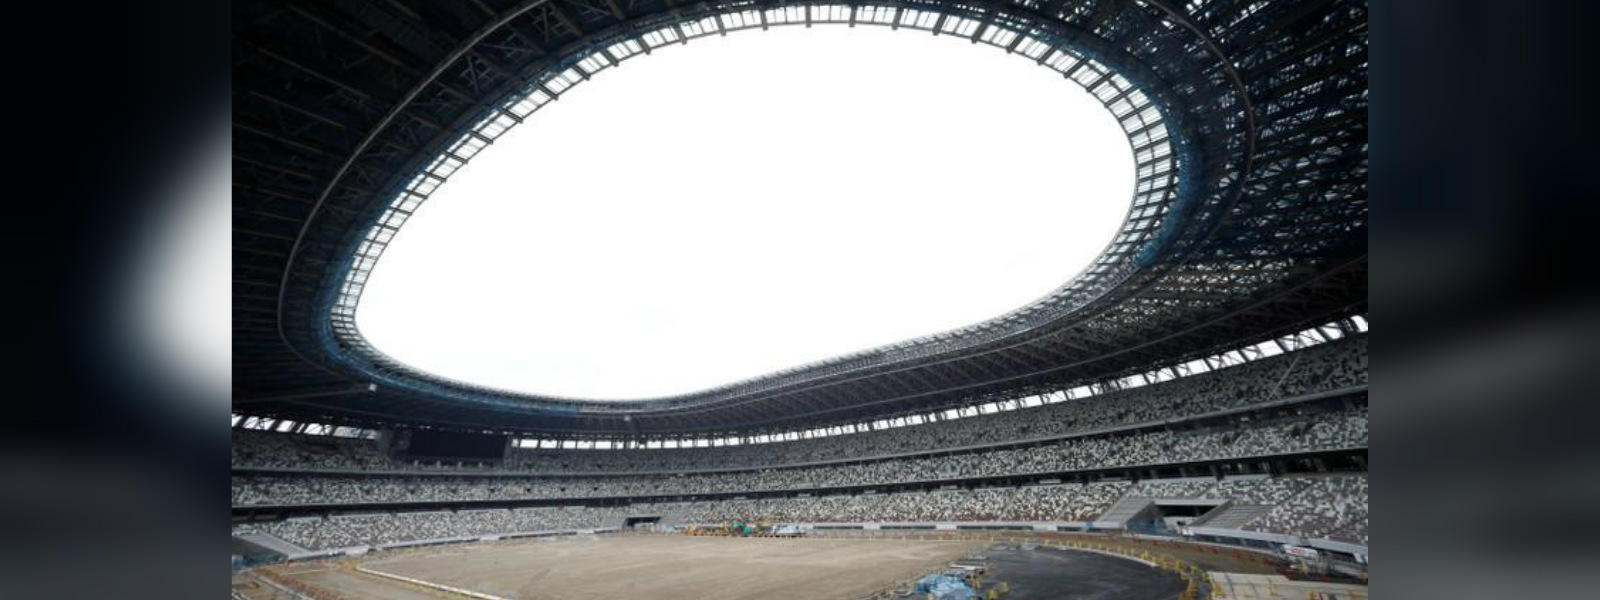 Tokyo’s Olympic stadium 90% finished, set to open in December